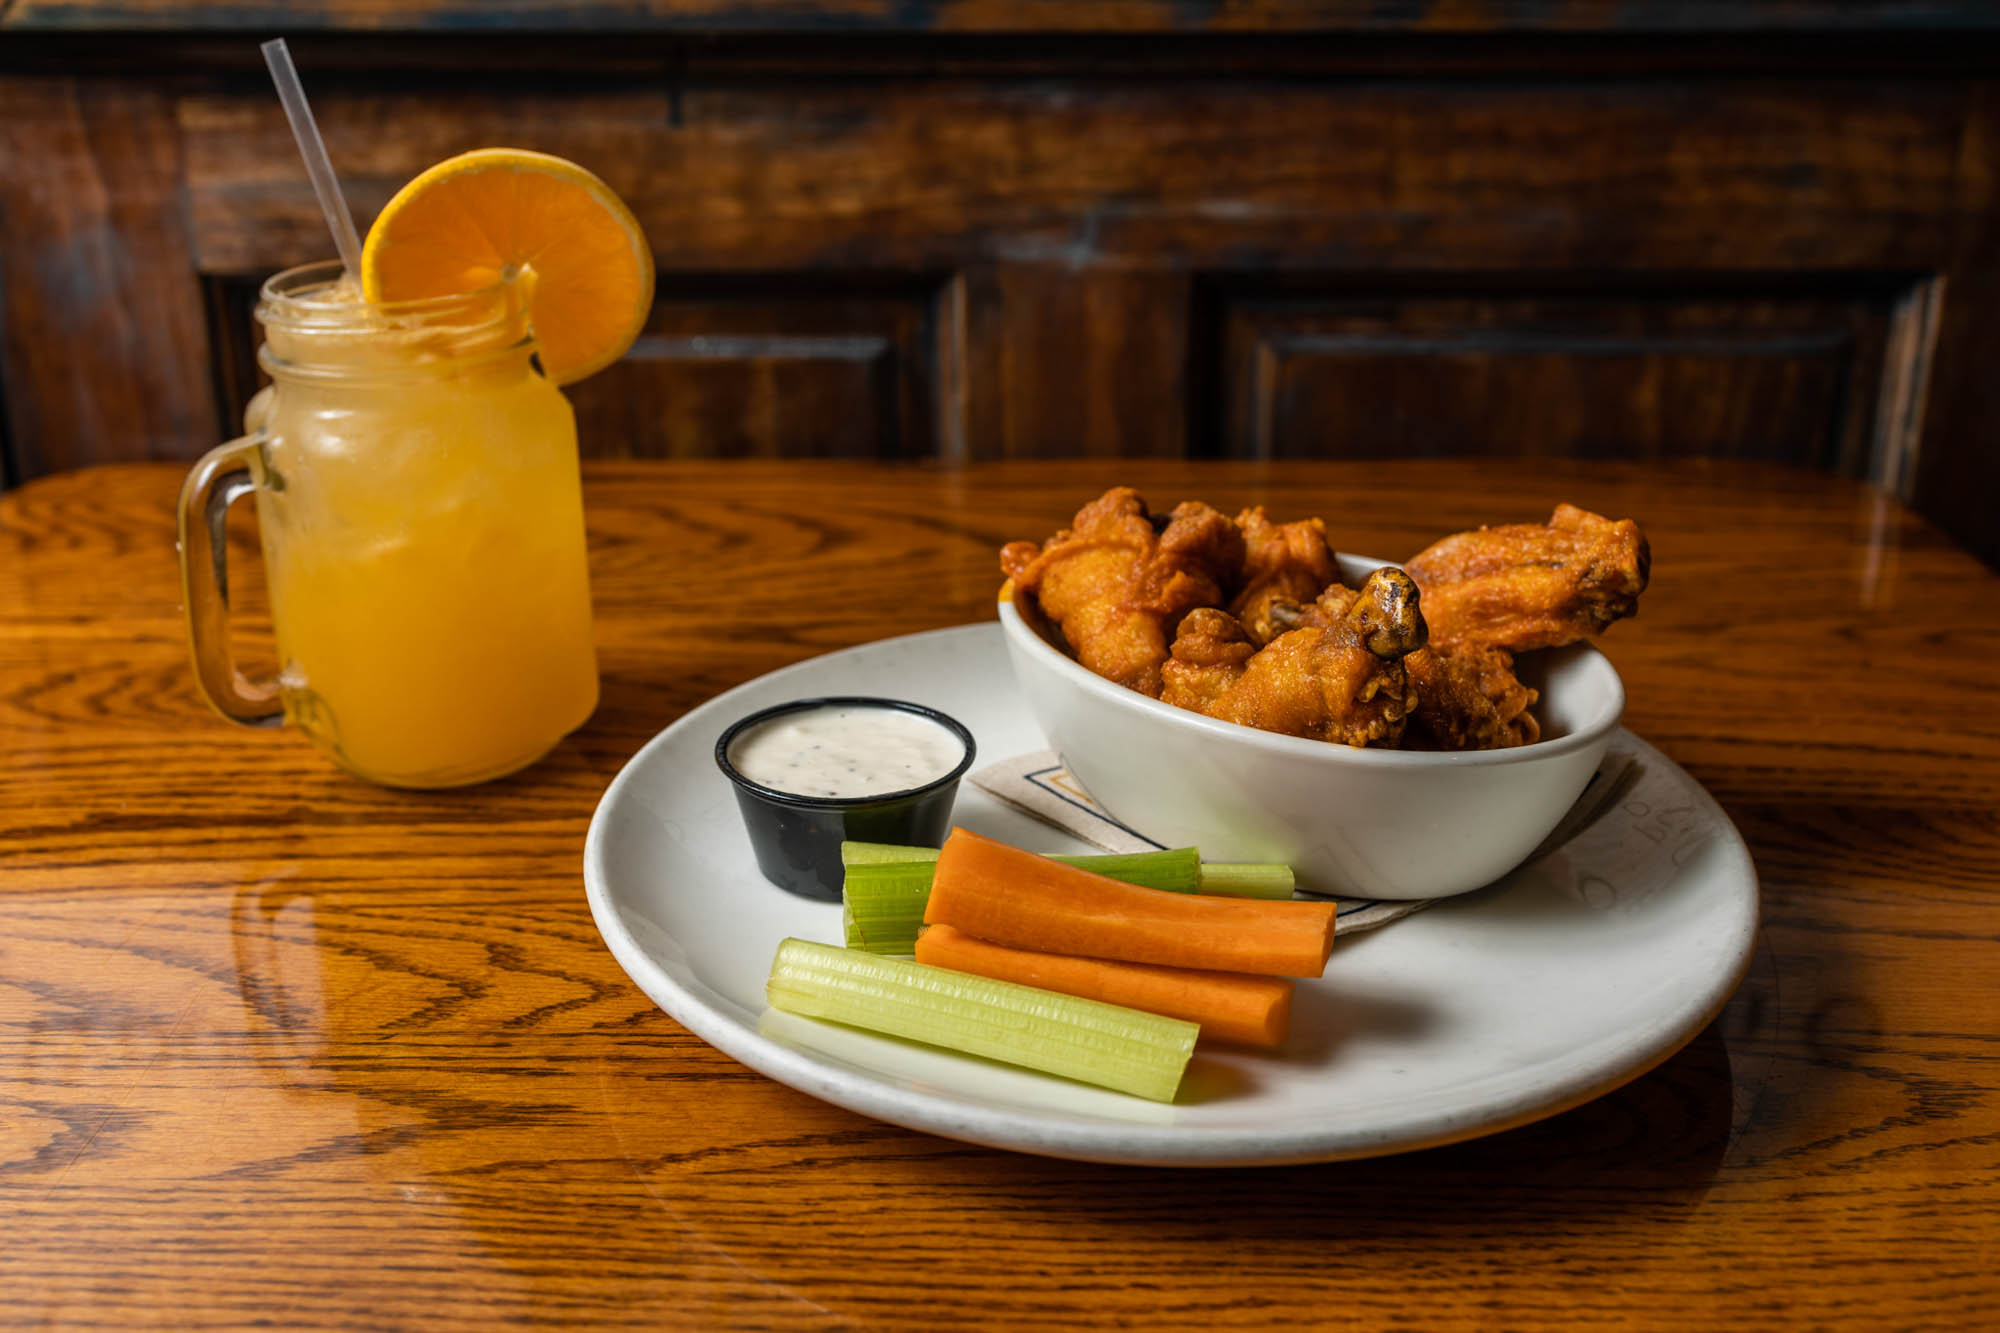 Beck’s Buffalo Wings with a sauce dip, celery and carrots on the plate, Orange Crush drink